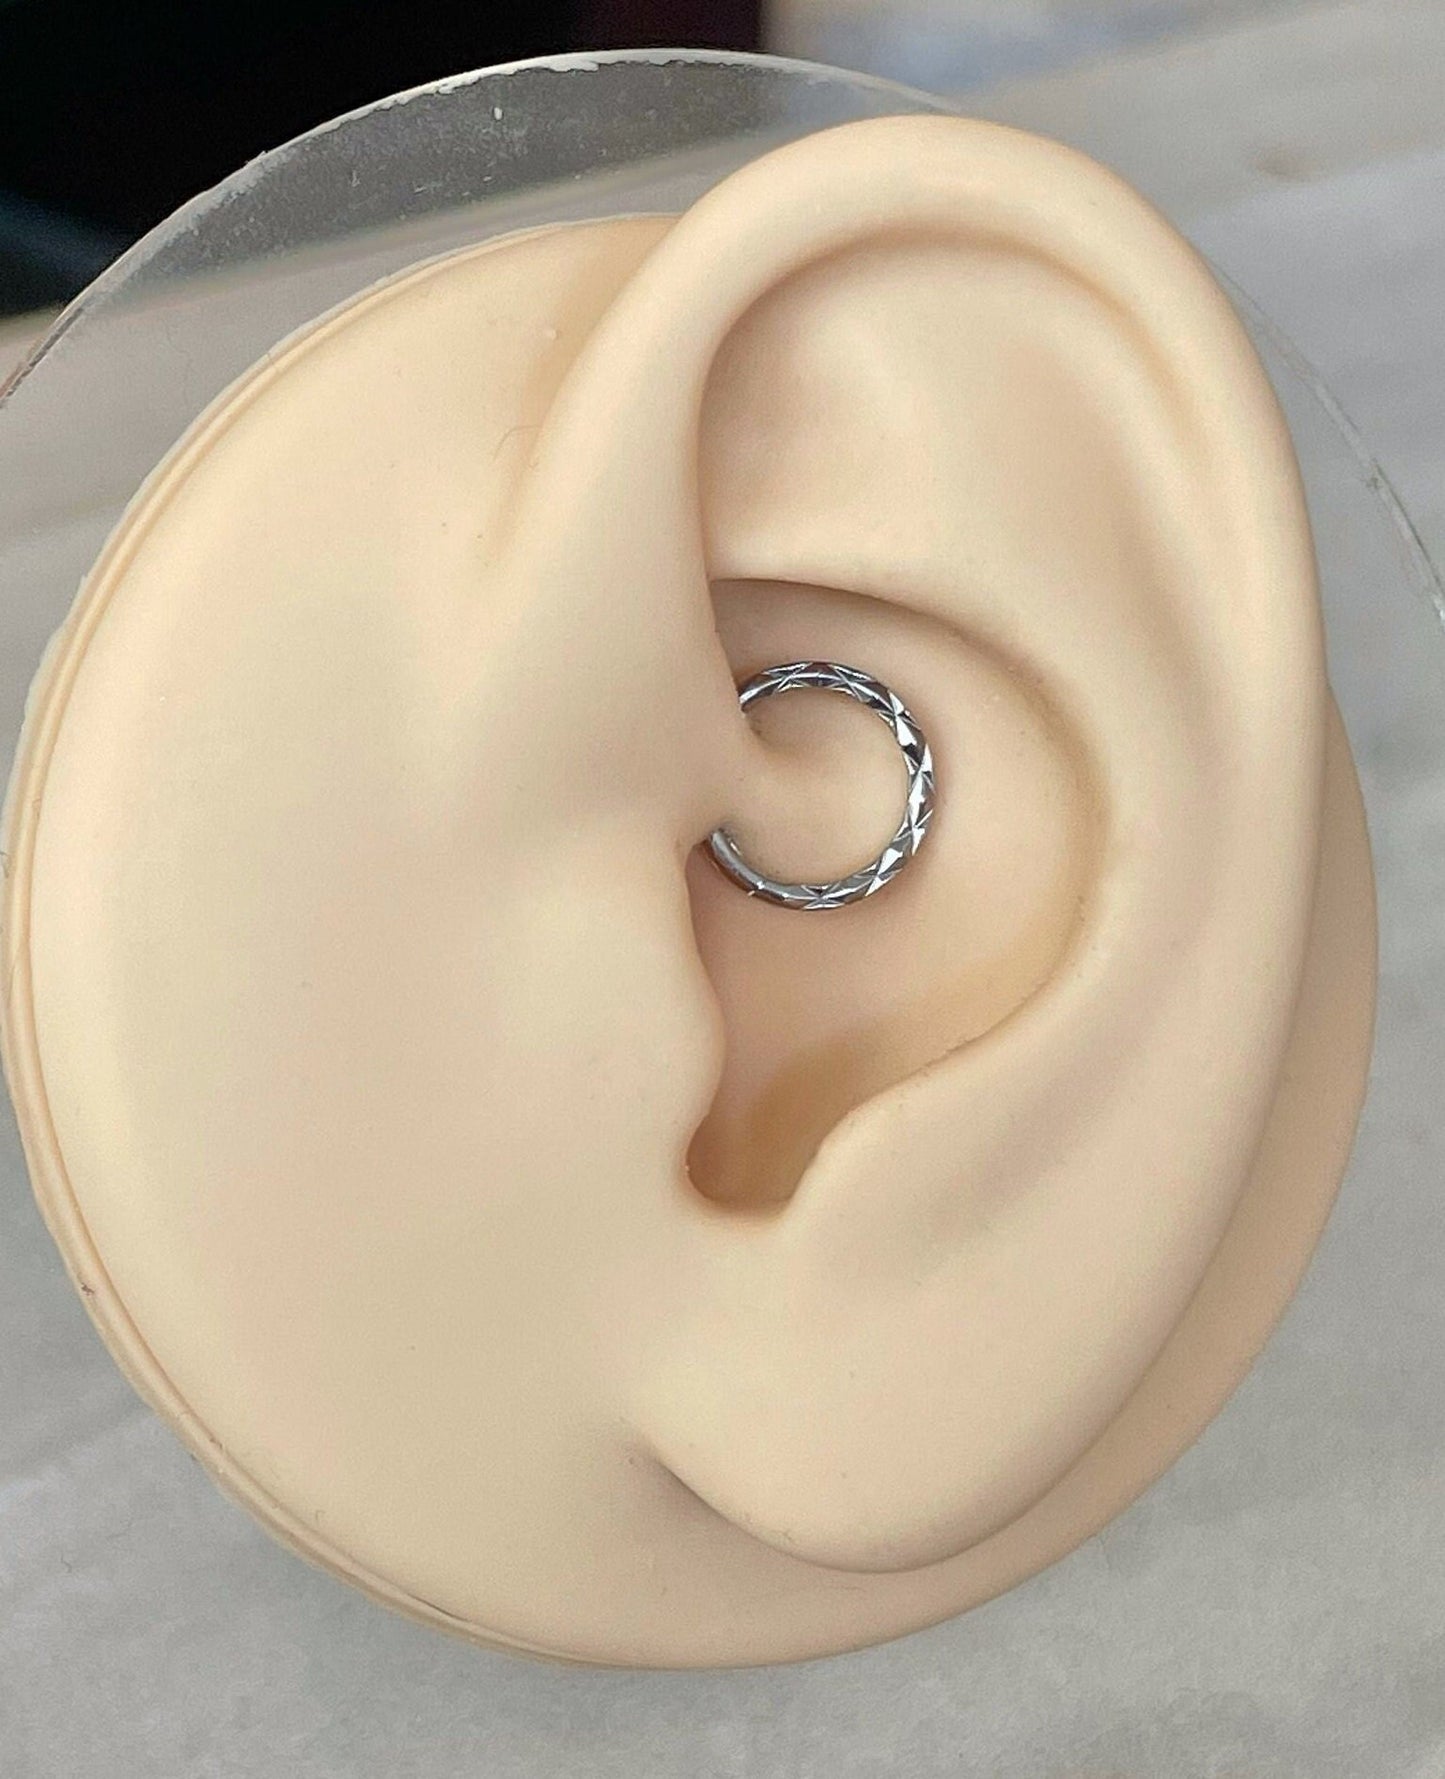 Simplistic Daith Earring (16G | 6mm, 8mm or 10mm | Surgical Steel | Gold, Silver or Black)